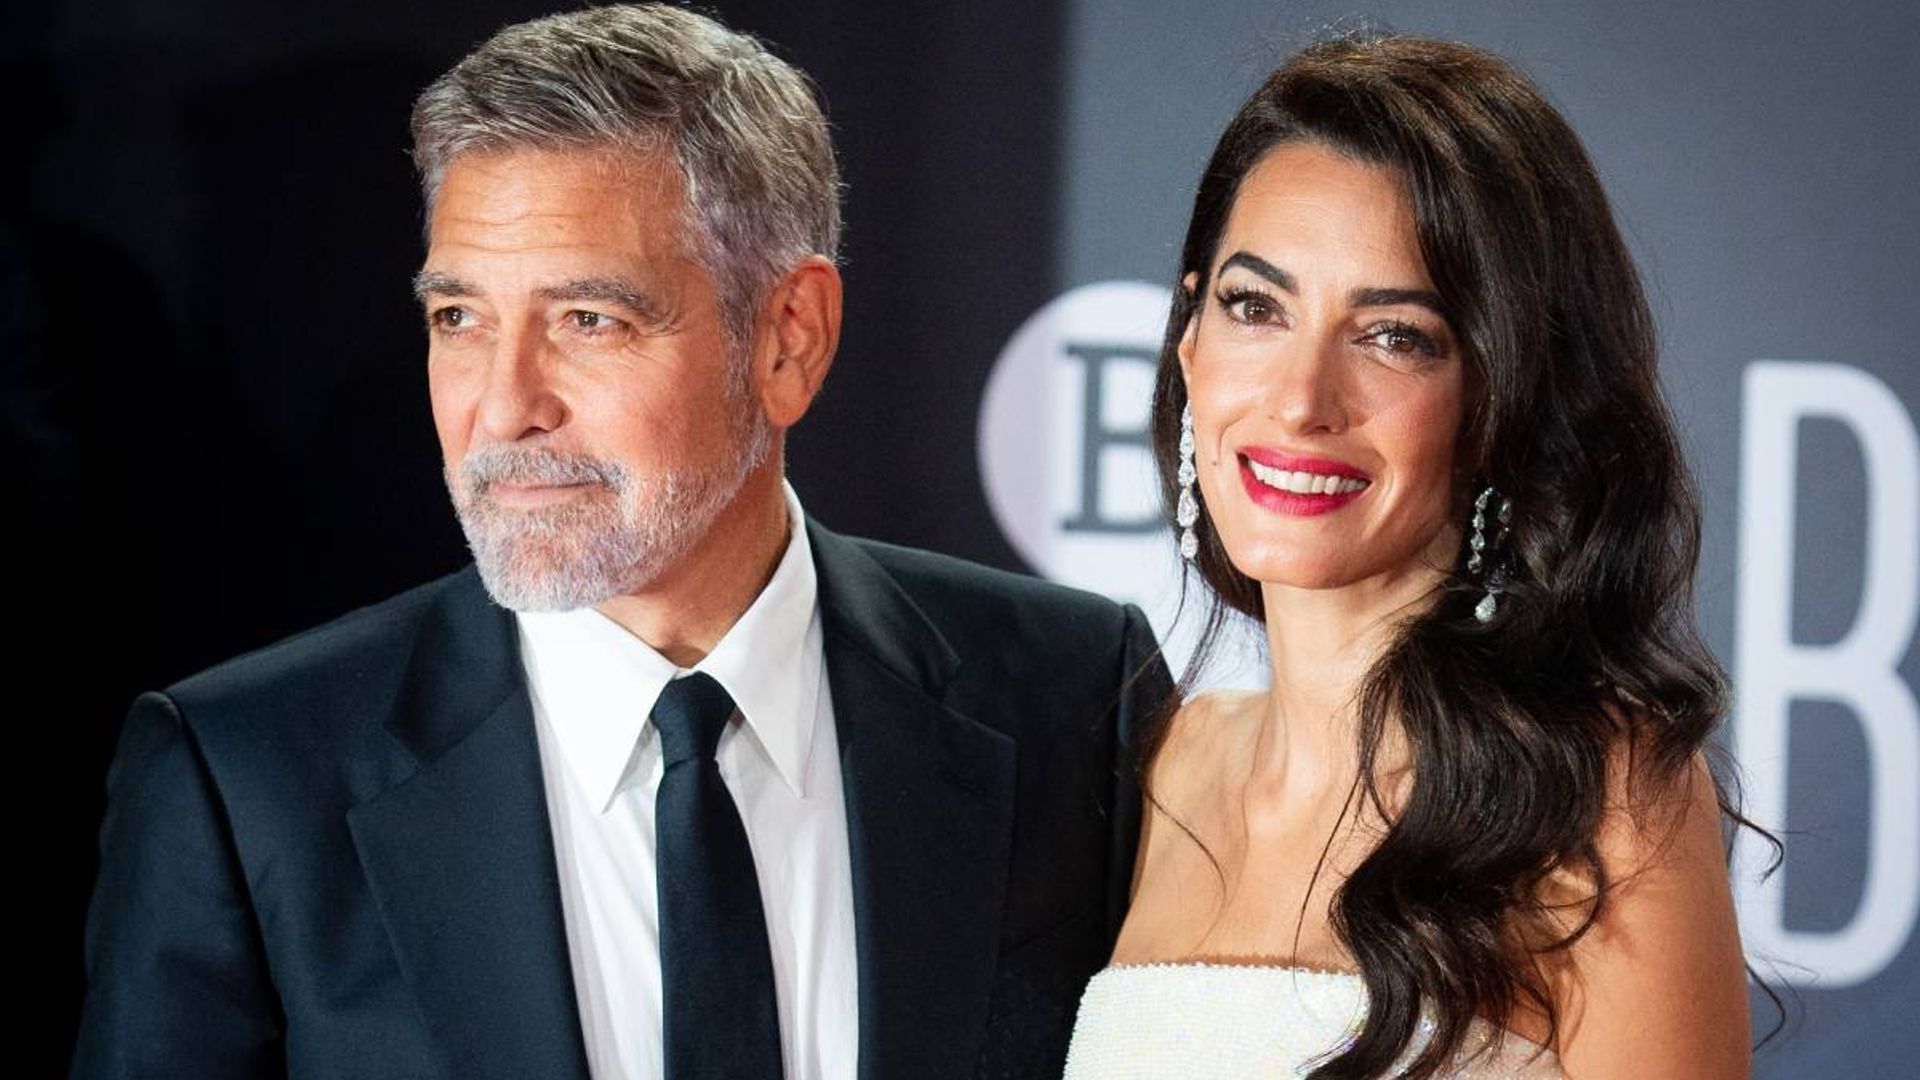 Amal Clooney wows in a chic mini dress on date night with George Clooney